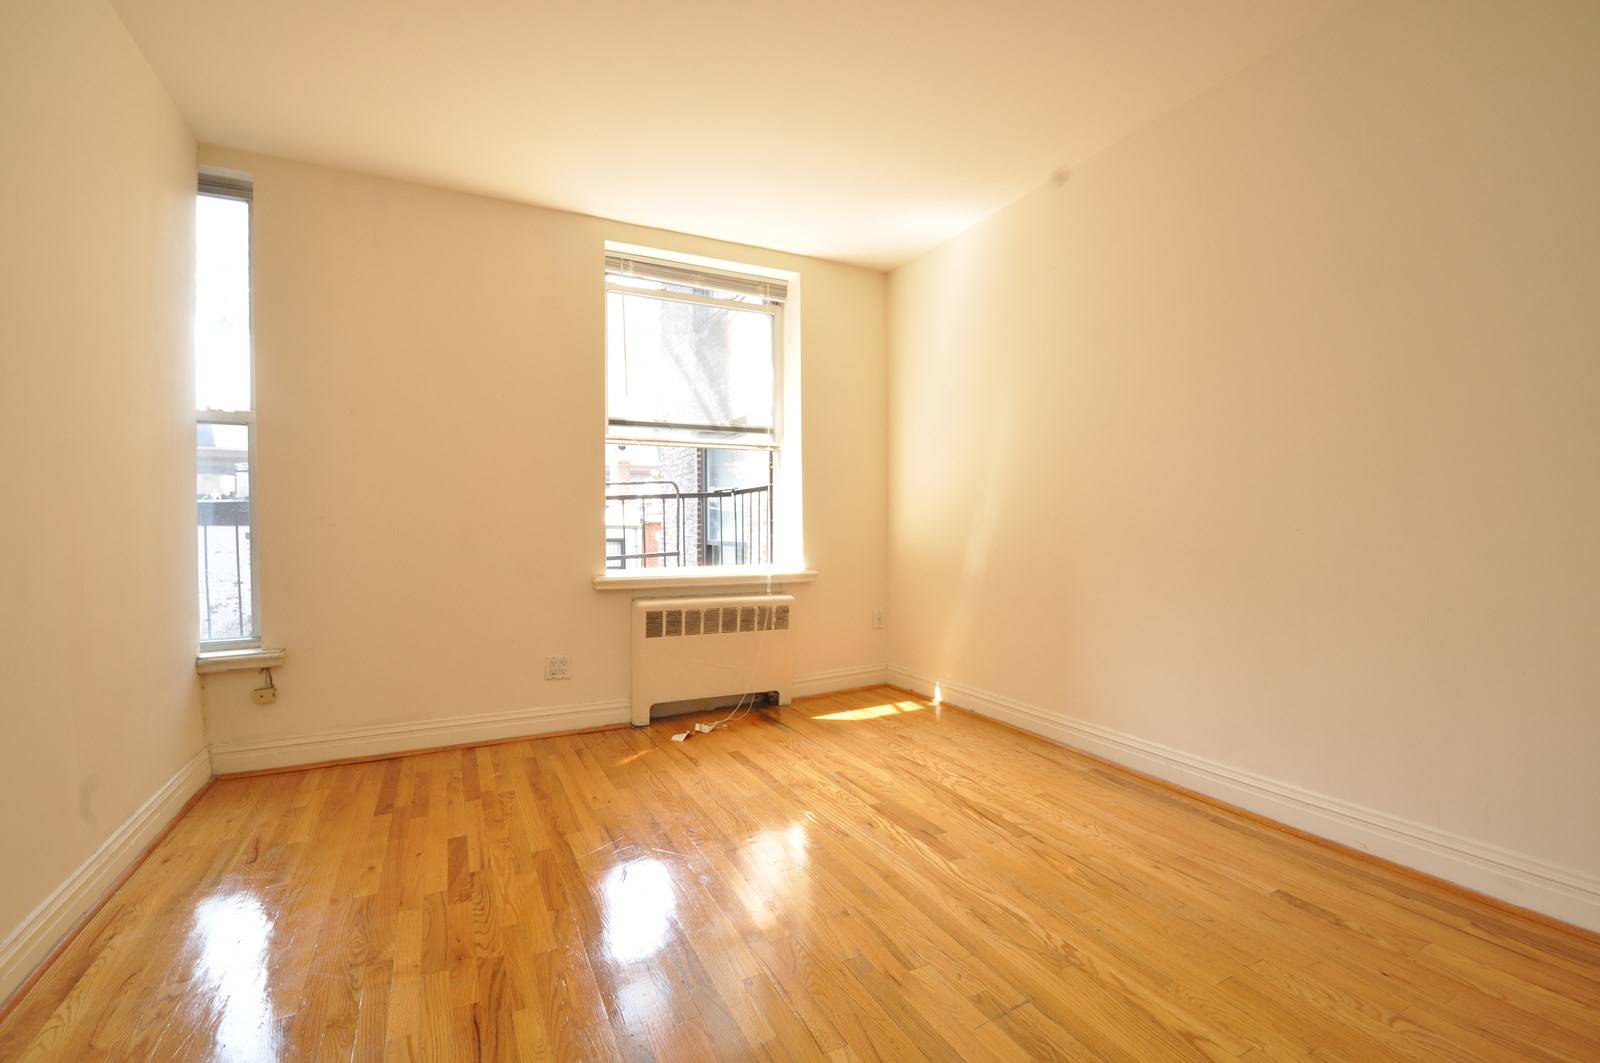 NEWLY RENOVATED 3br -- NOMAD -- STEPS FROM MADISON SQUARE PARK, BARUCH COLLEGE